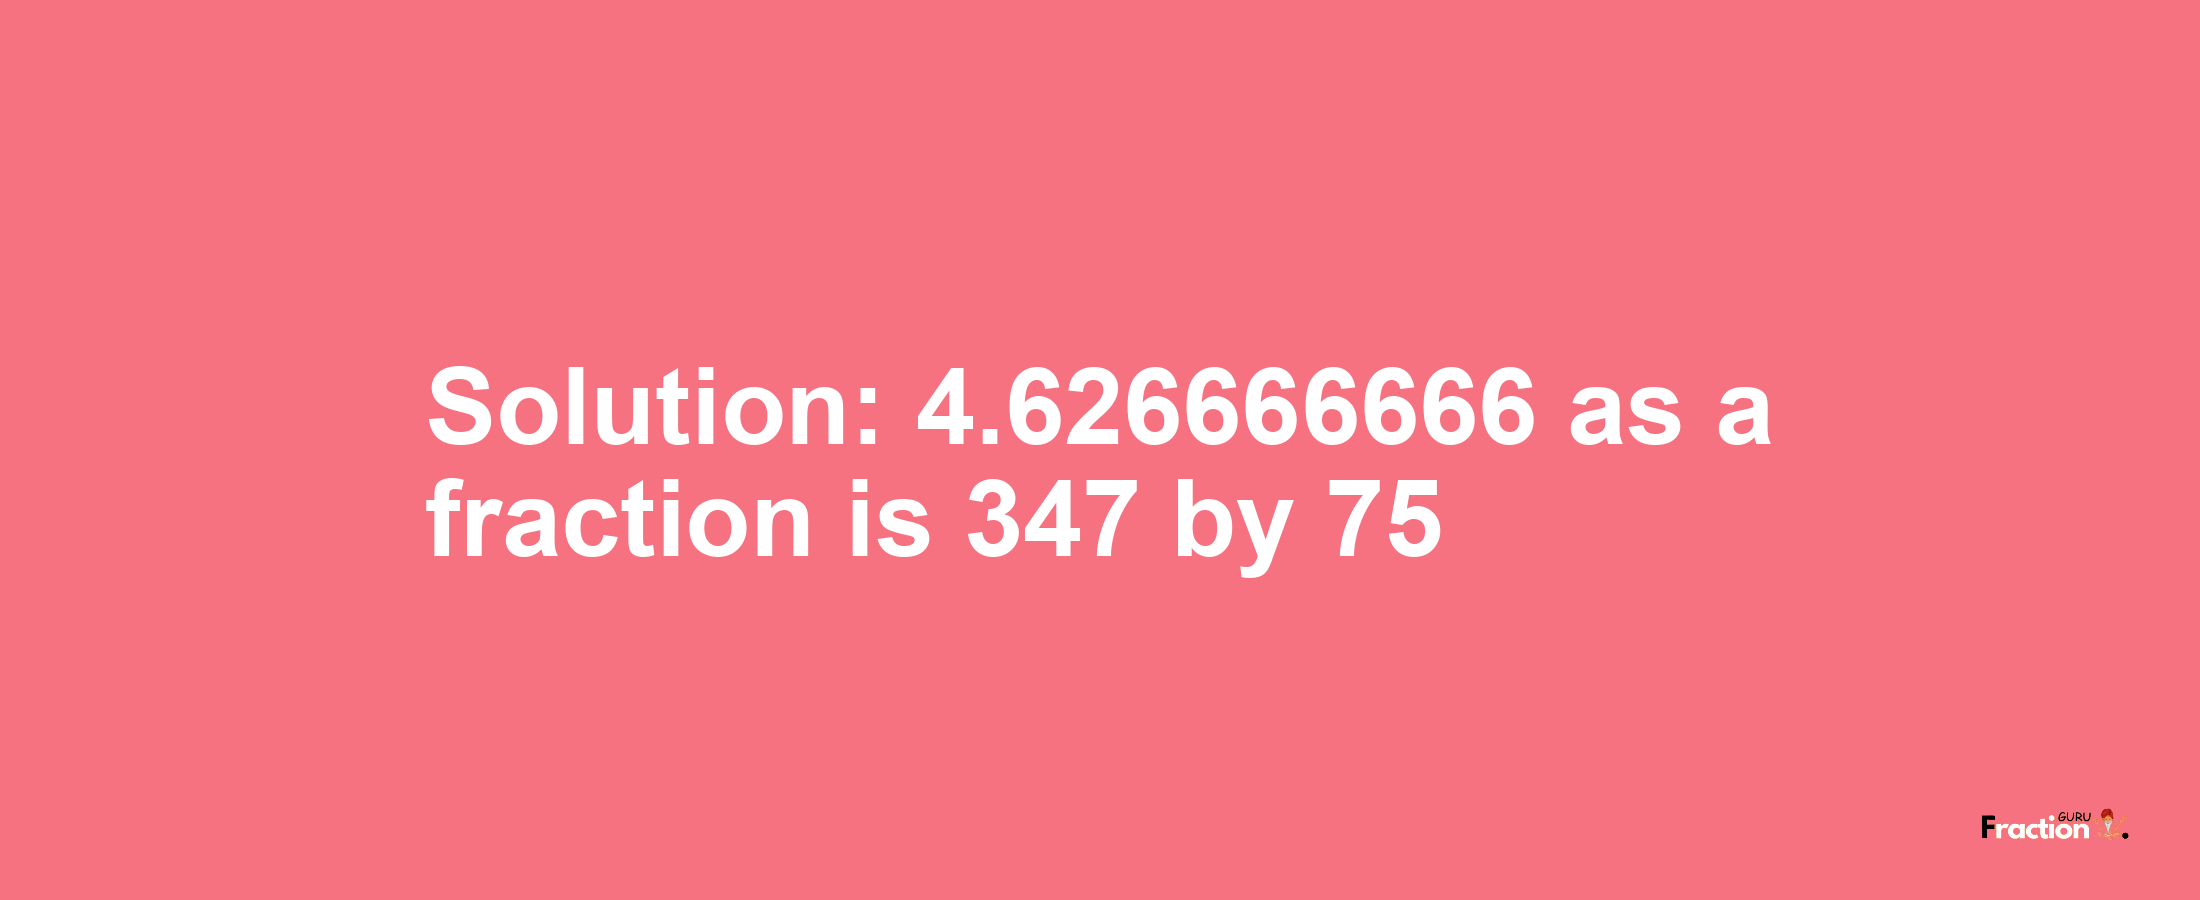 Solution:4.626666666 as a fraction is 347/75